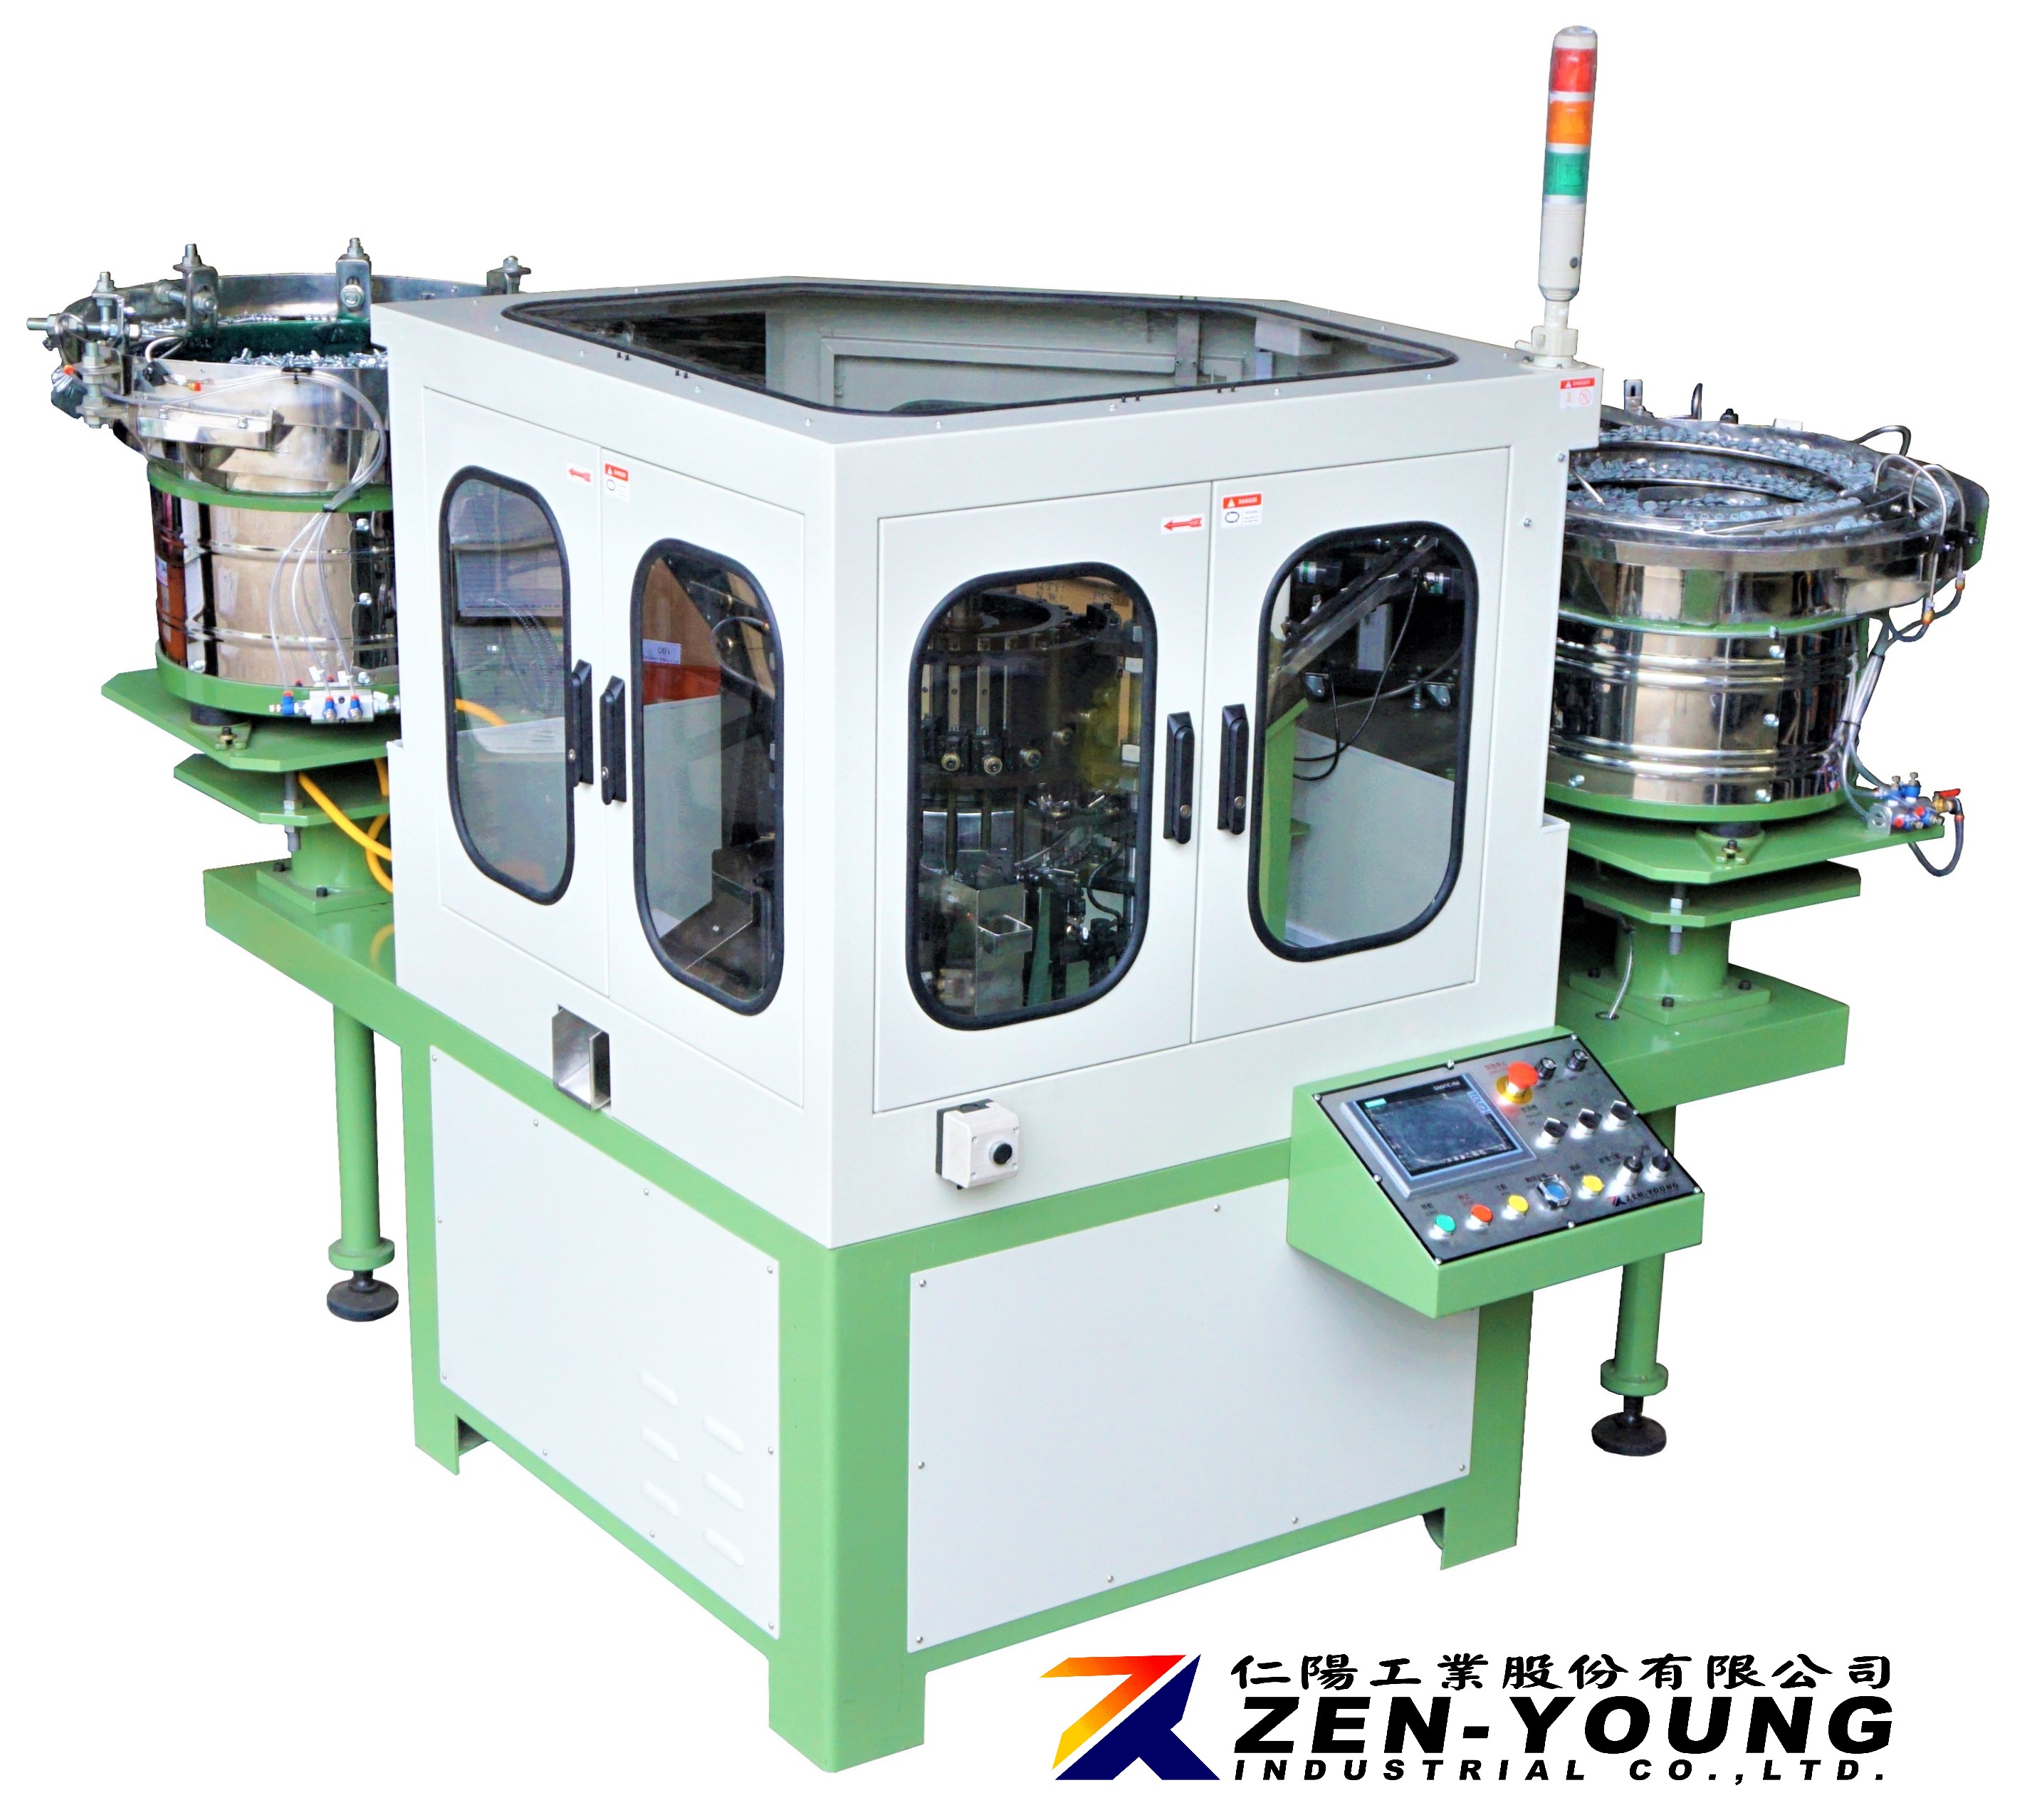 Nail / Screw  & Plastic / EPDM Washer Assembly Machine